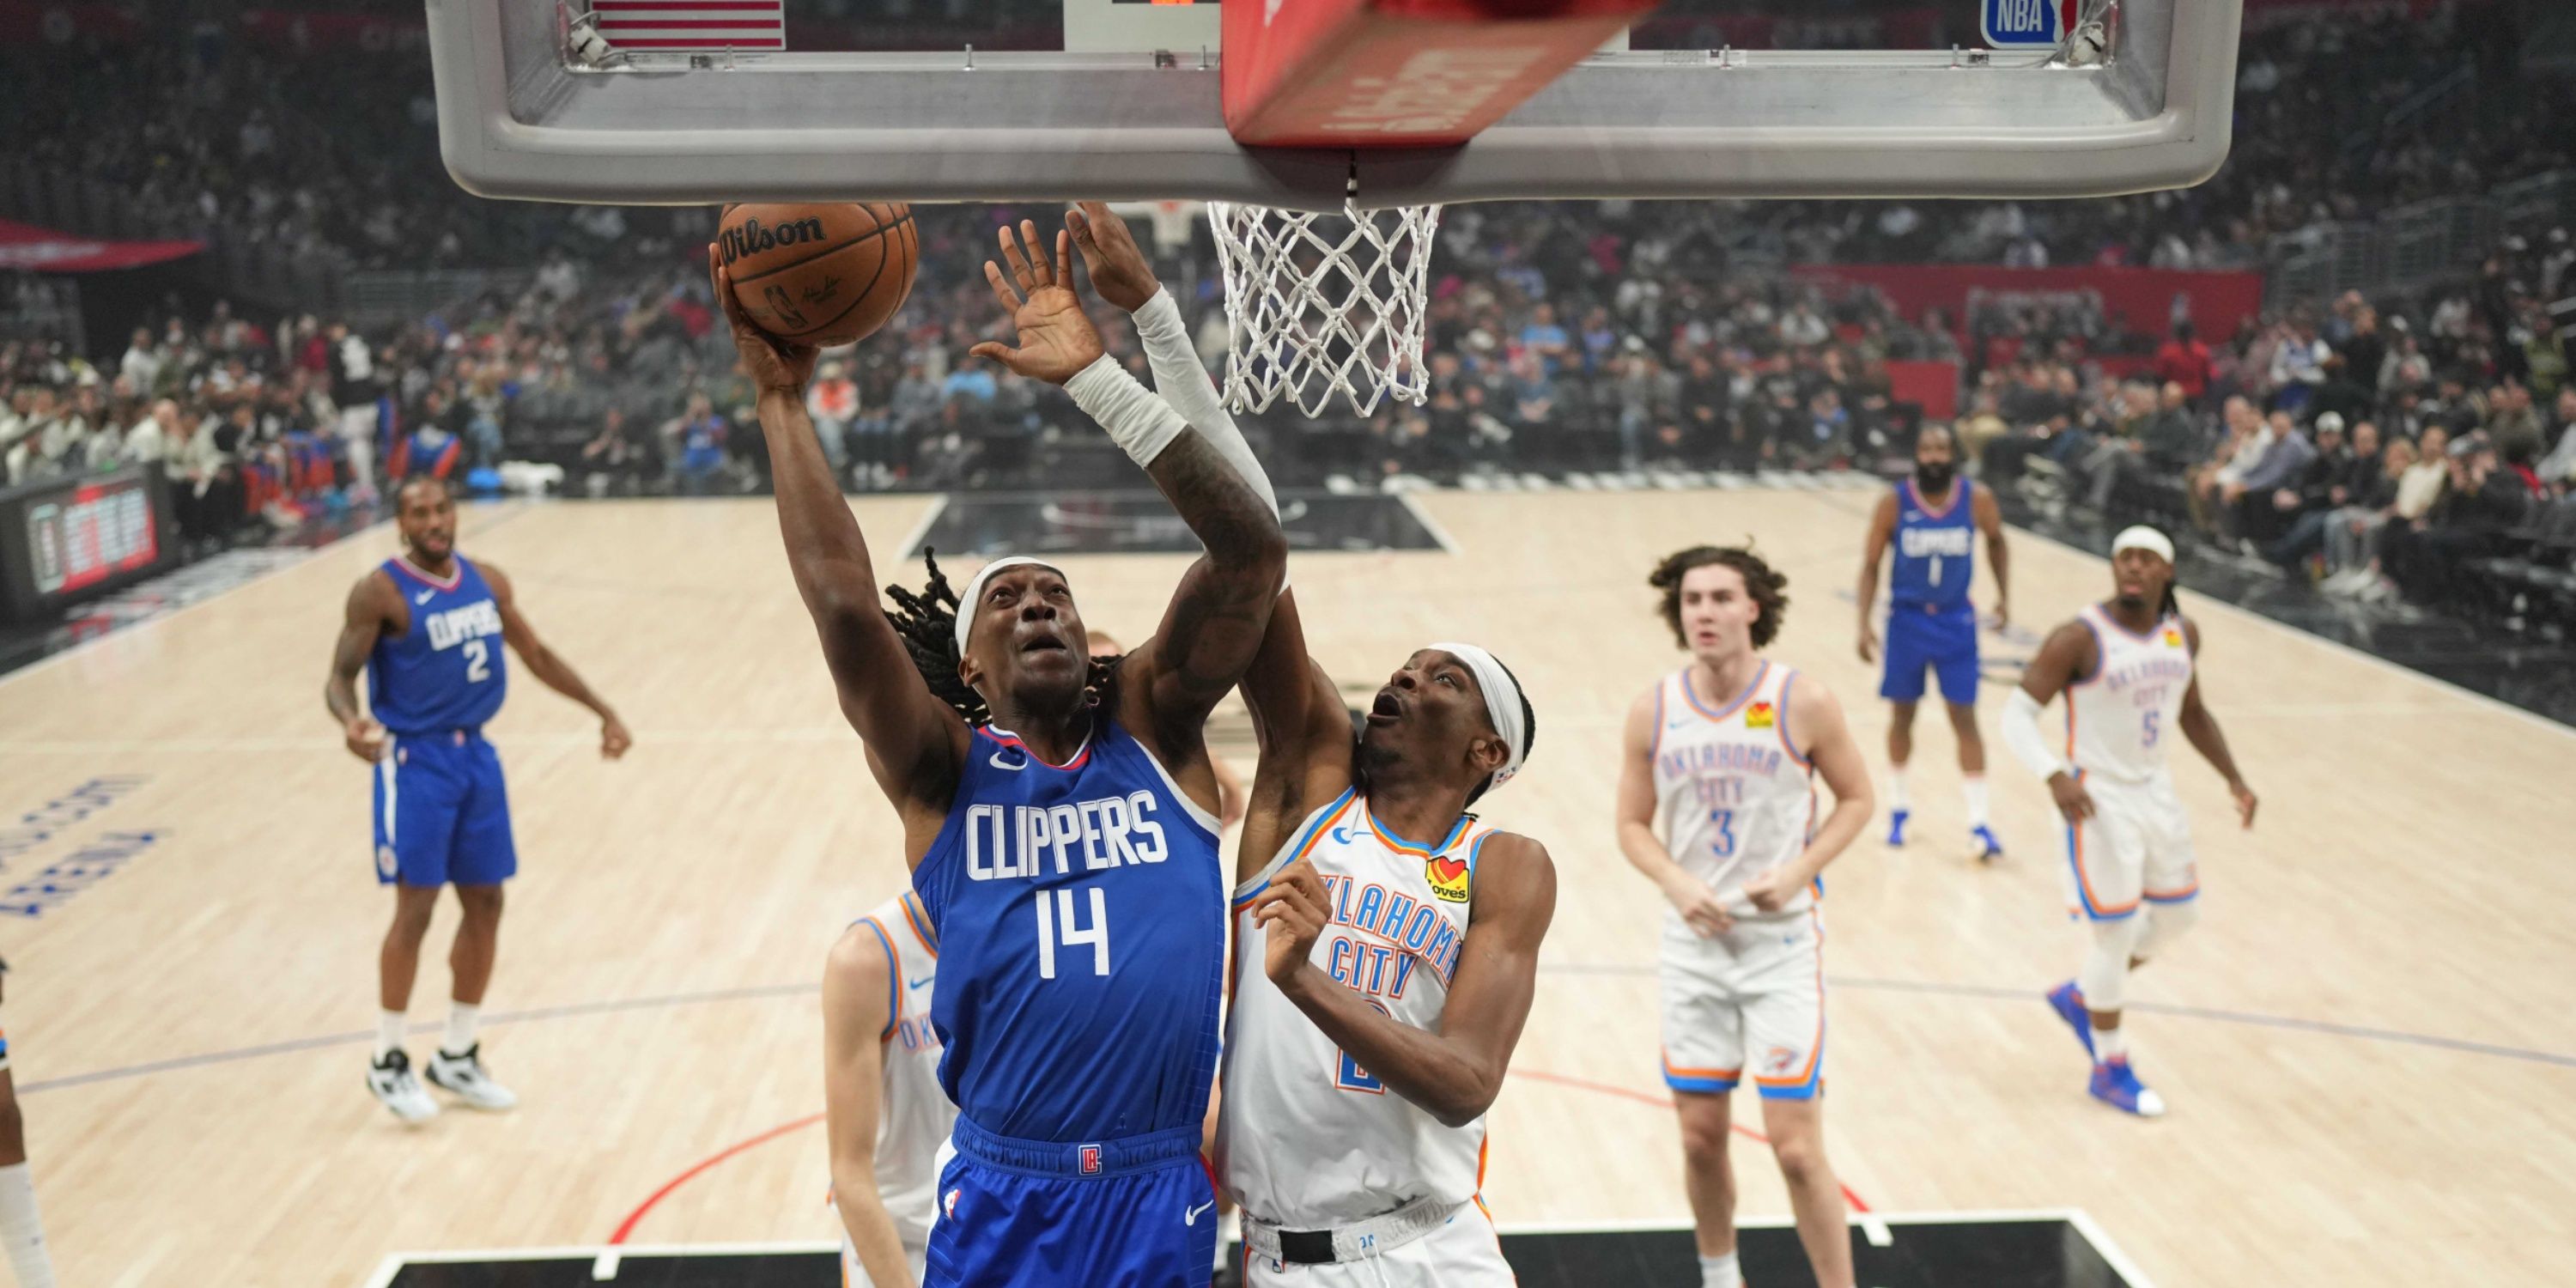 Clippers vs. Thunder: preview and picks before tipoff